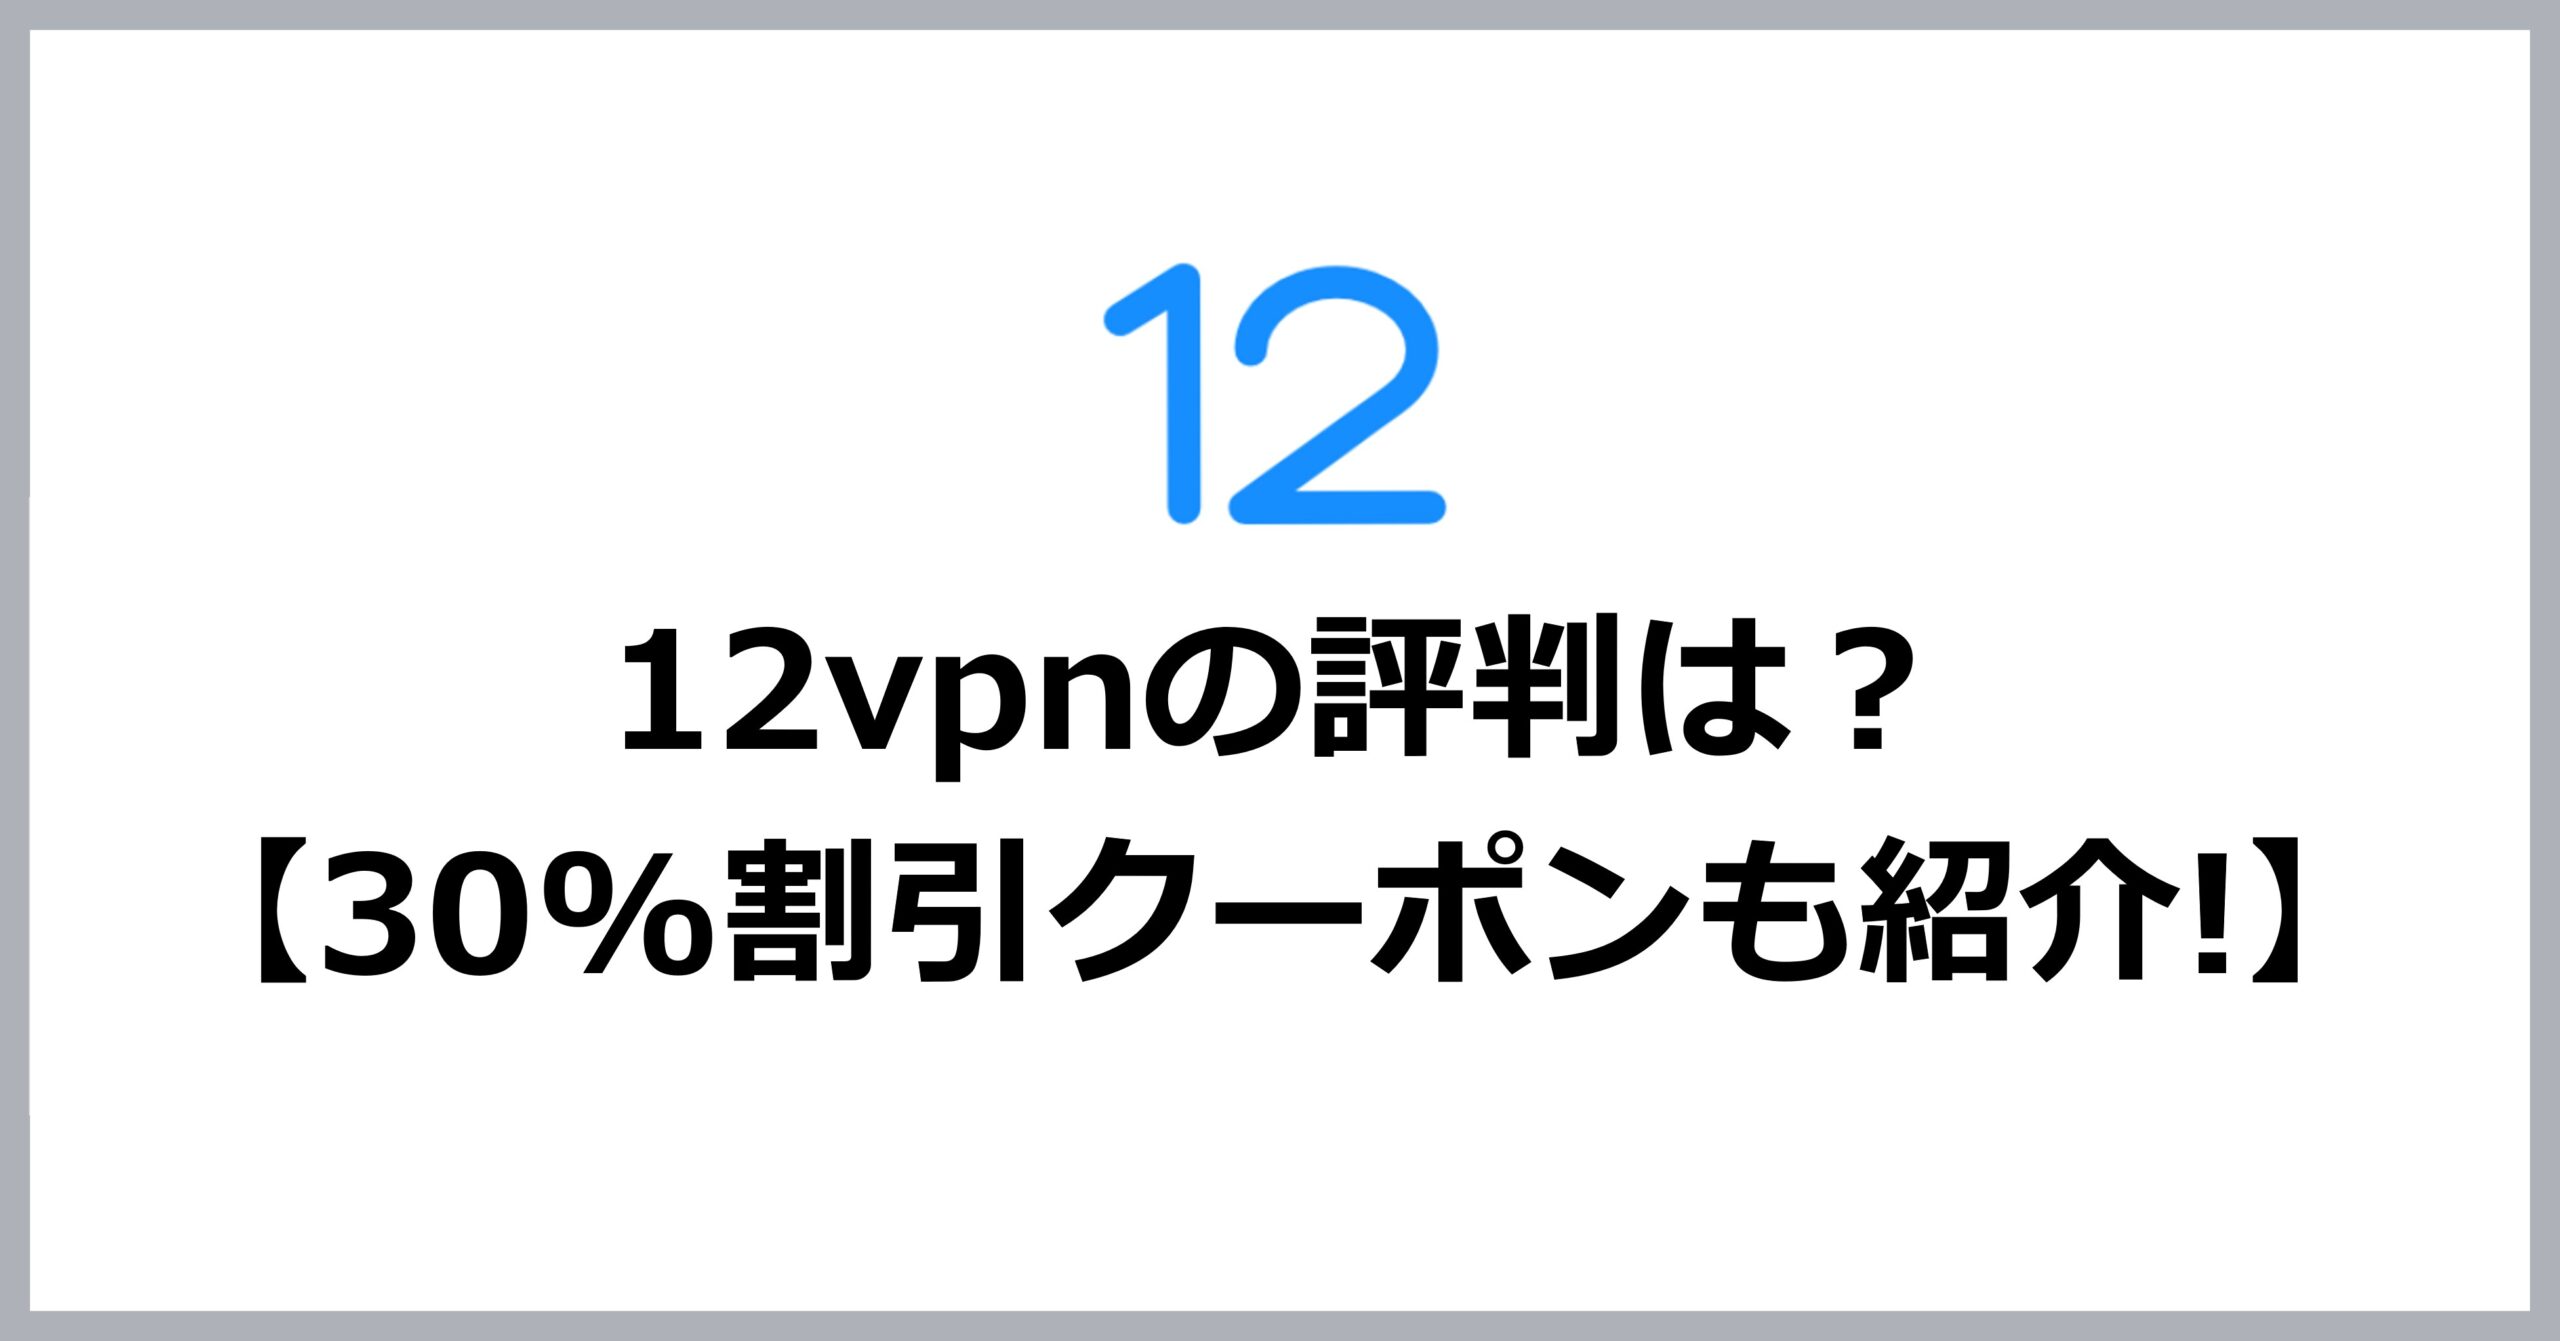 12vpn（12vpx）の評判・メリット・デメリット